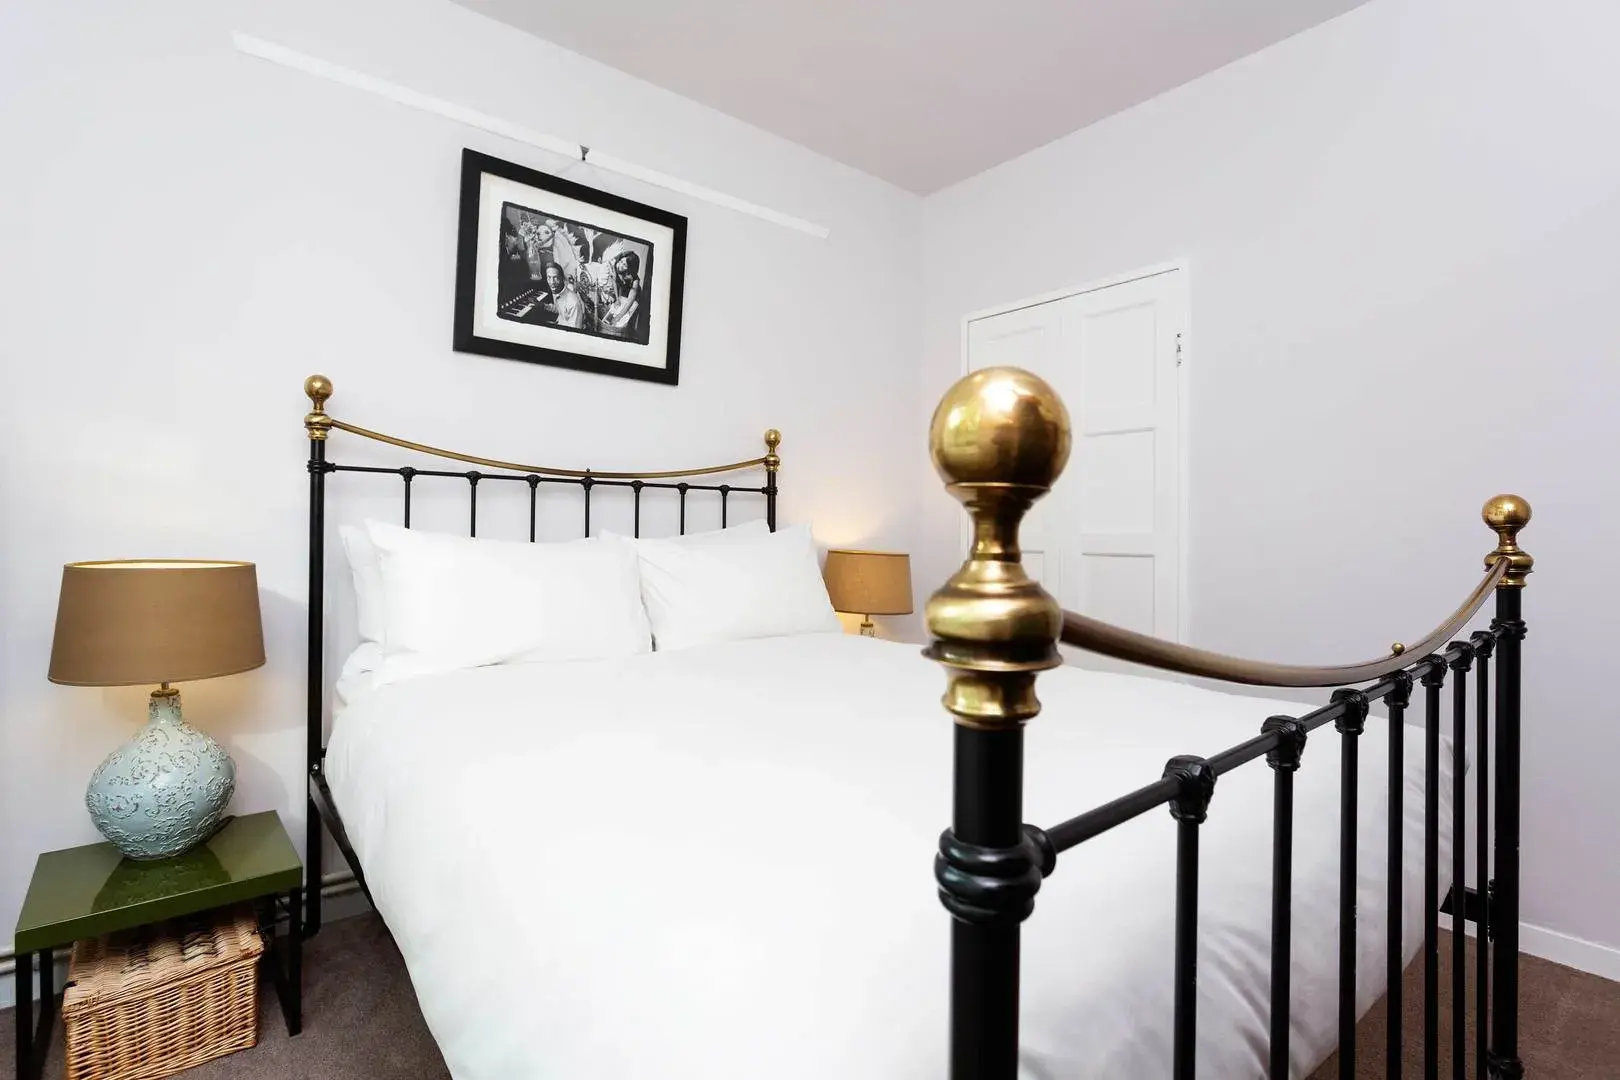 Denbigh House, holiday home in Notting Hill, London